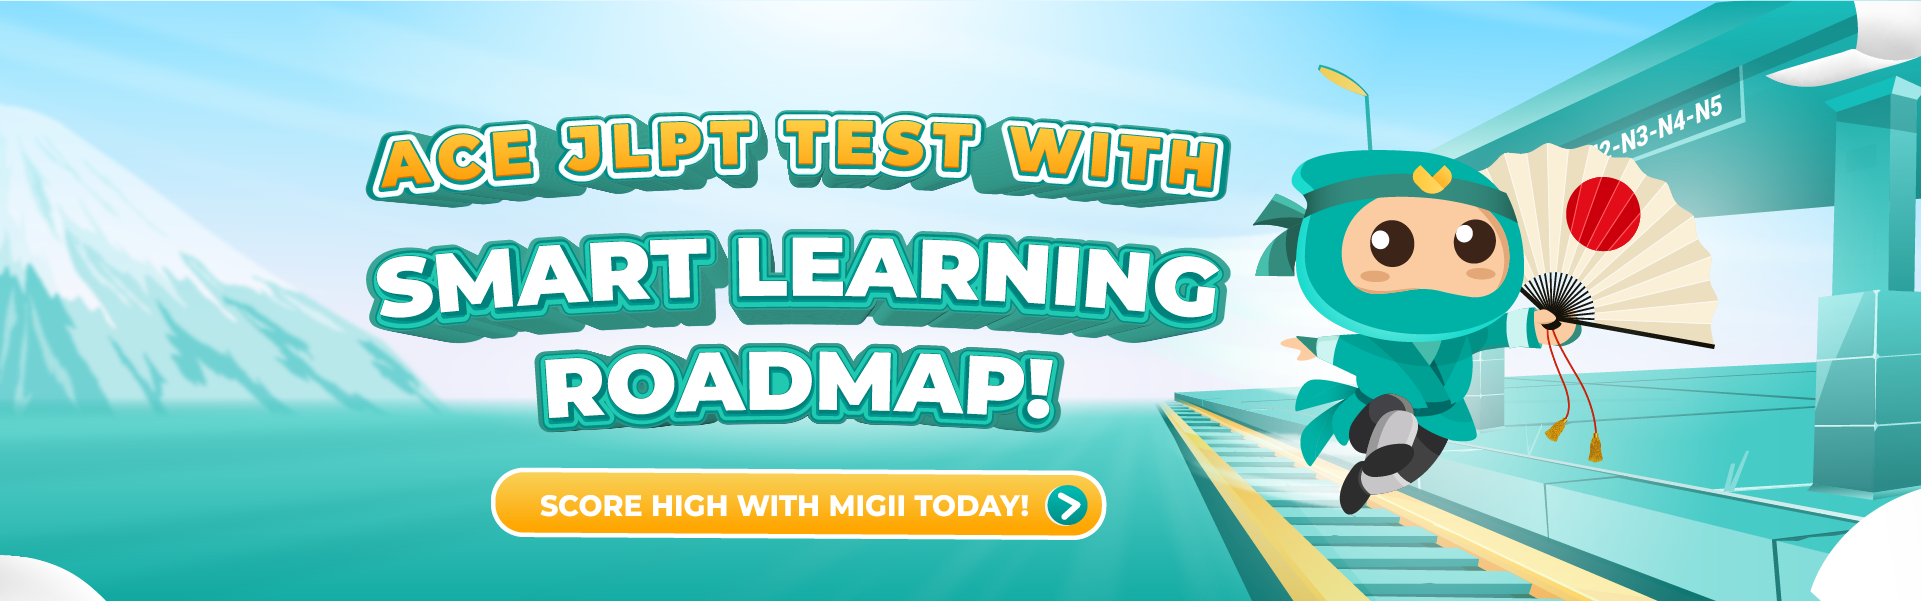 Ace JLPT test with smart learning roadmap!